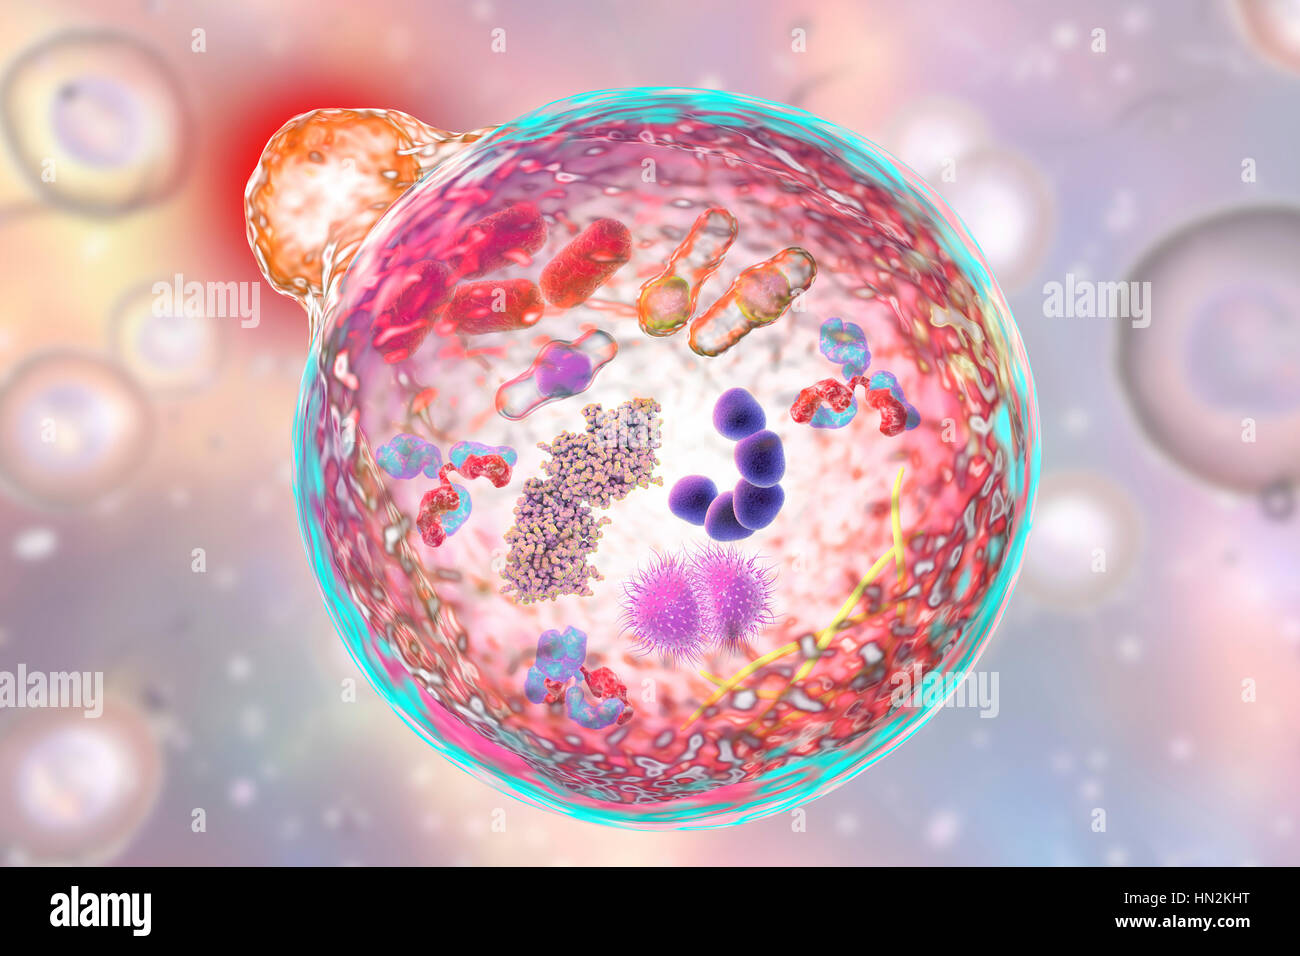 Autophagy. Computer illustration of a lysosome (orange) fusing with an autophagosome (large sphere). Autophagy (autophagocytosis) is the natural mechanism that destroys unnecessary or dysfunctional cellular components and recycles their materials. The target components are first isolated from the rest of the cell within the double-membraned autophagosome. This then fuses with a lysosome, the contents of which degrade the target components. The 2016 Nobel Prize in Physiology or Medicine was awarded to Japanese cell biologist Yoshinori Ohsumi for his discoveries of mechanisms for autophagy. Stock Photo